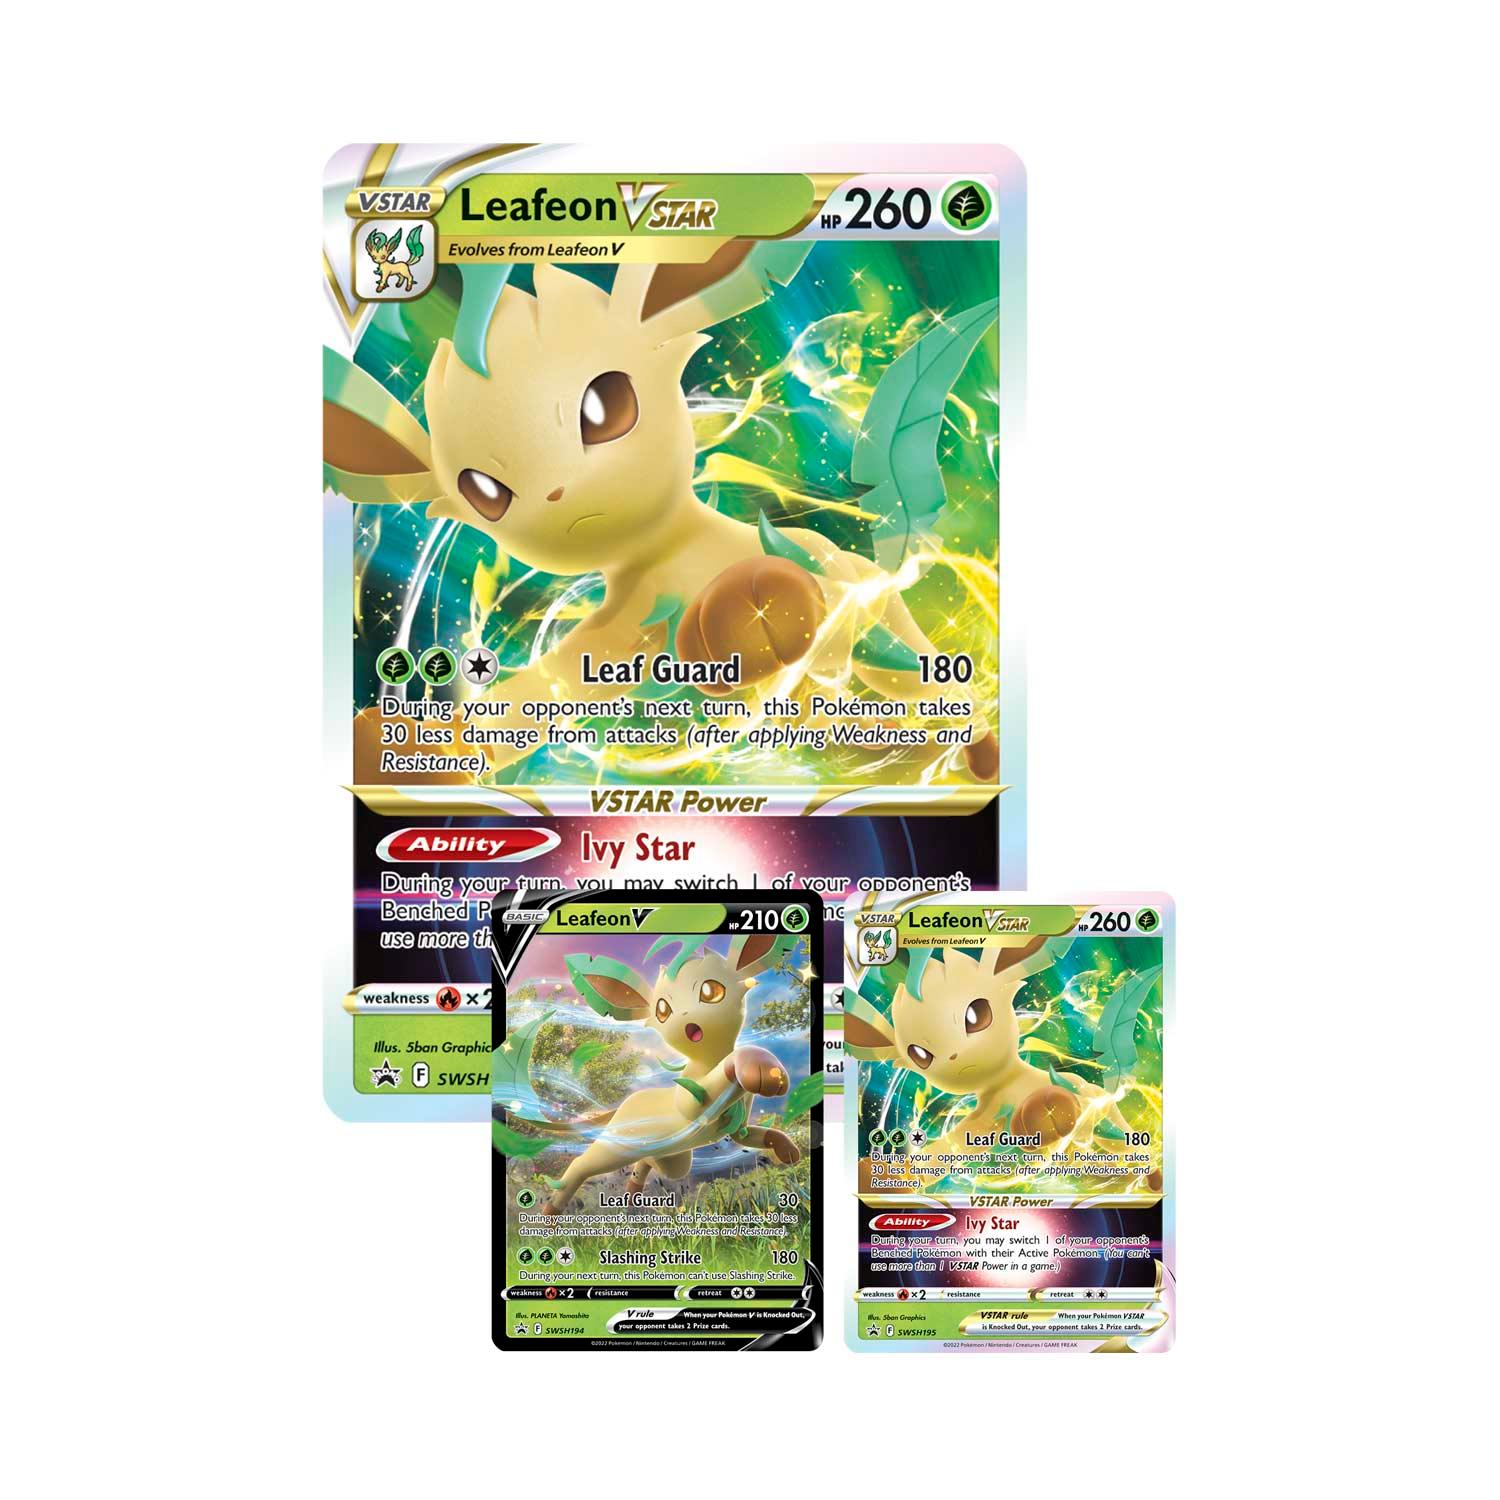 Pokemon Box - Special Collection - Leafeon VSTAR - Hobby Champion Inc